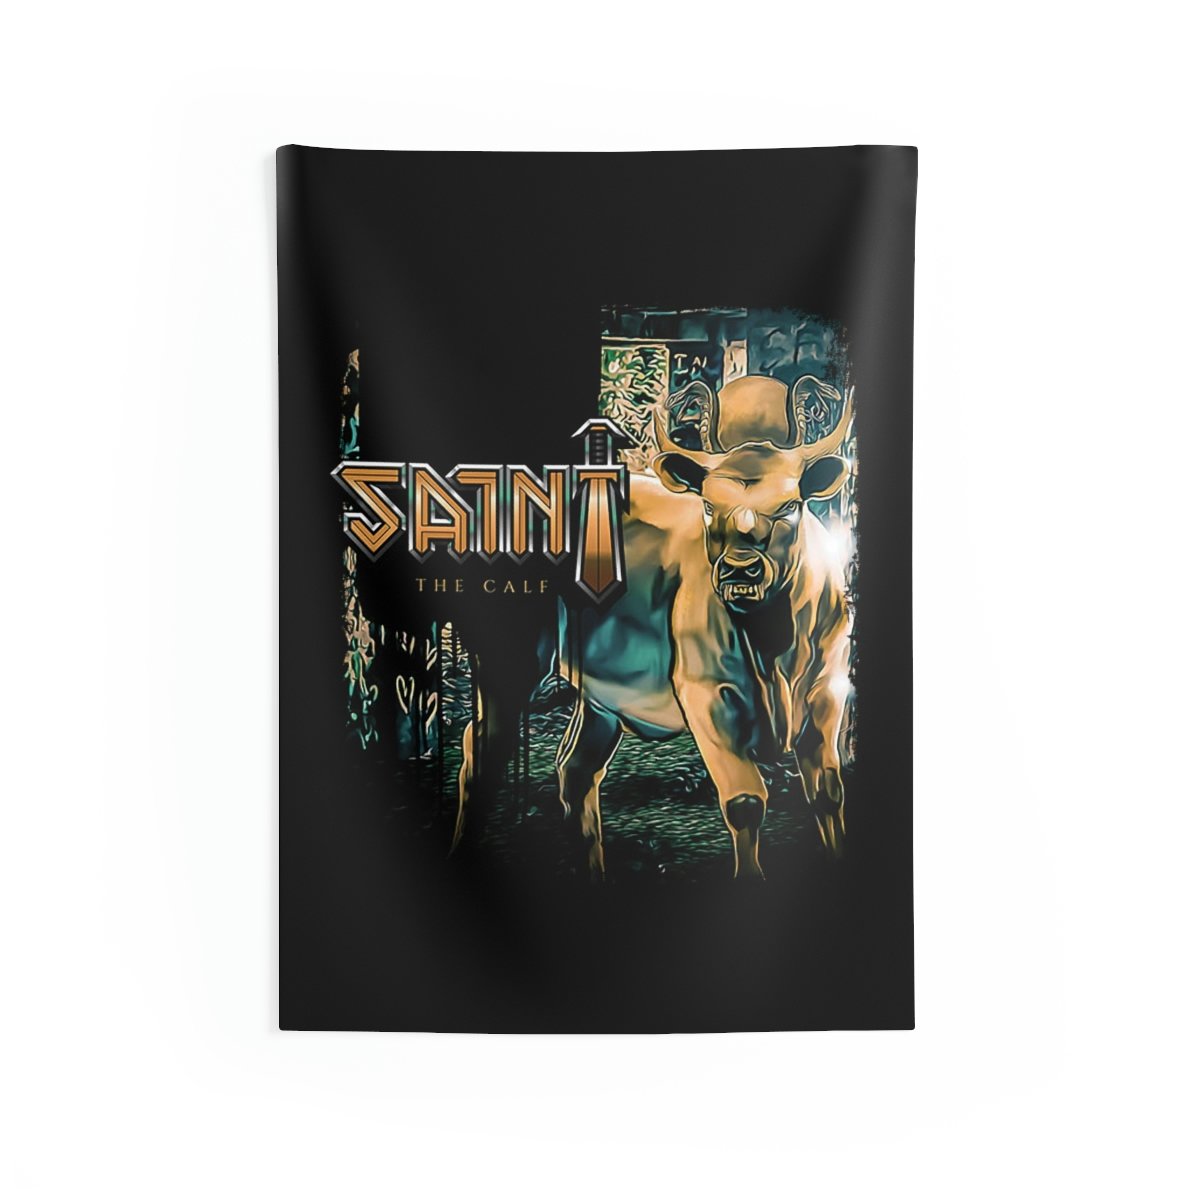 Saint – The Calf Indoor Wall Tapestries